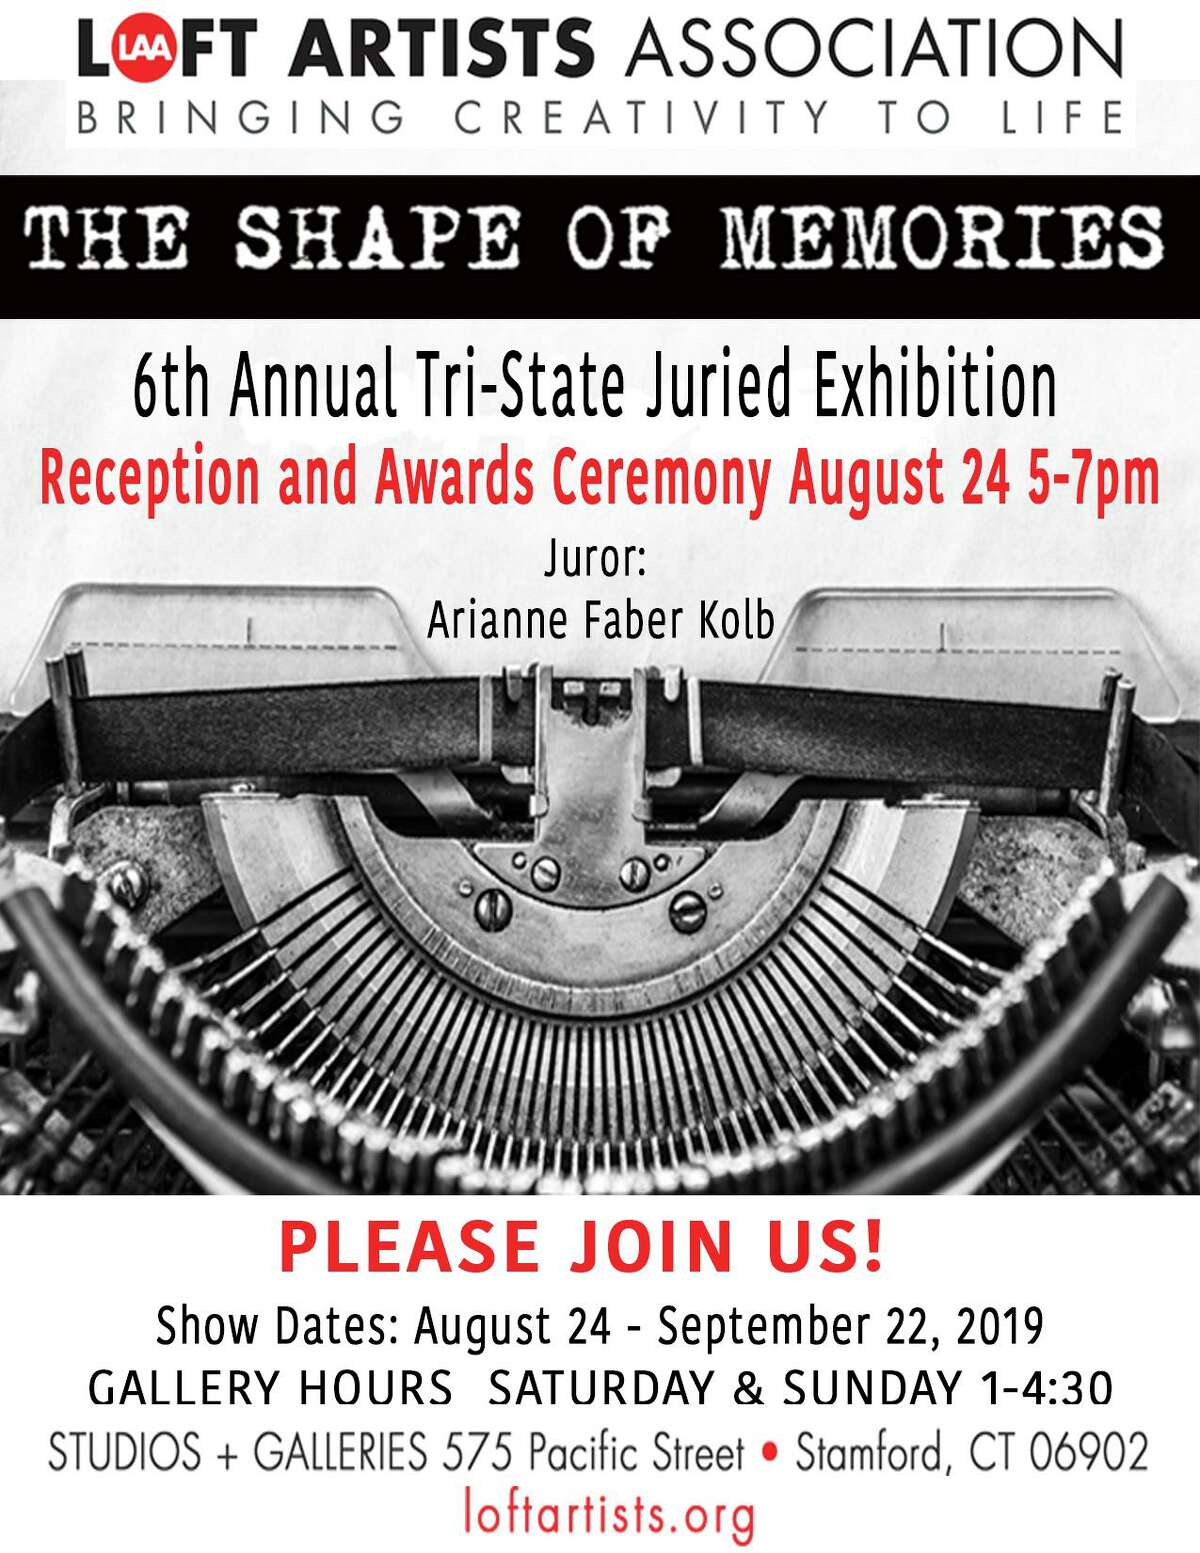 Stamford’s Loft Artists Association’s sixth annual Tri-state juried exhibition, “The Shape of Memories,” is running Aug. 24-Sept. 22.